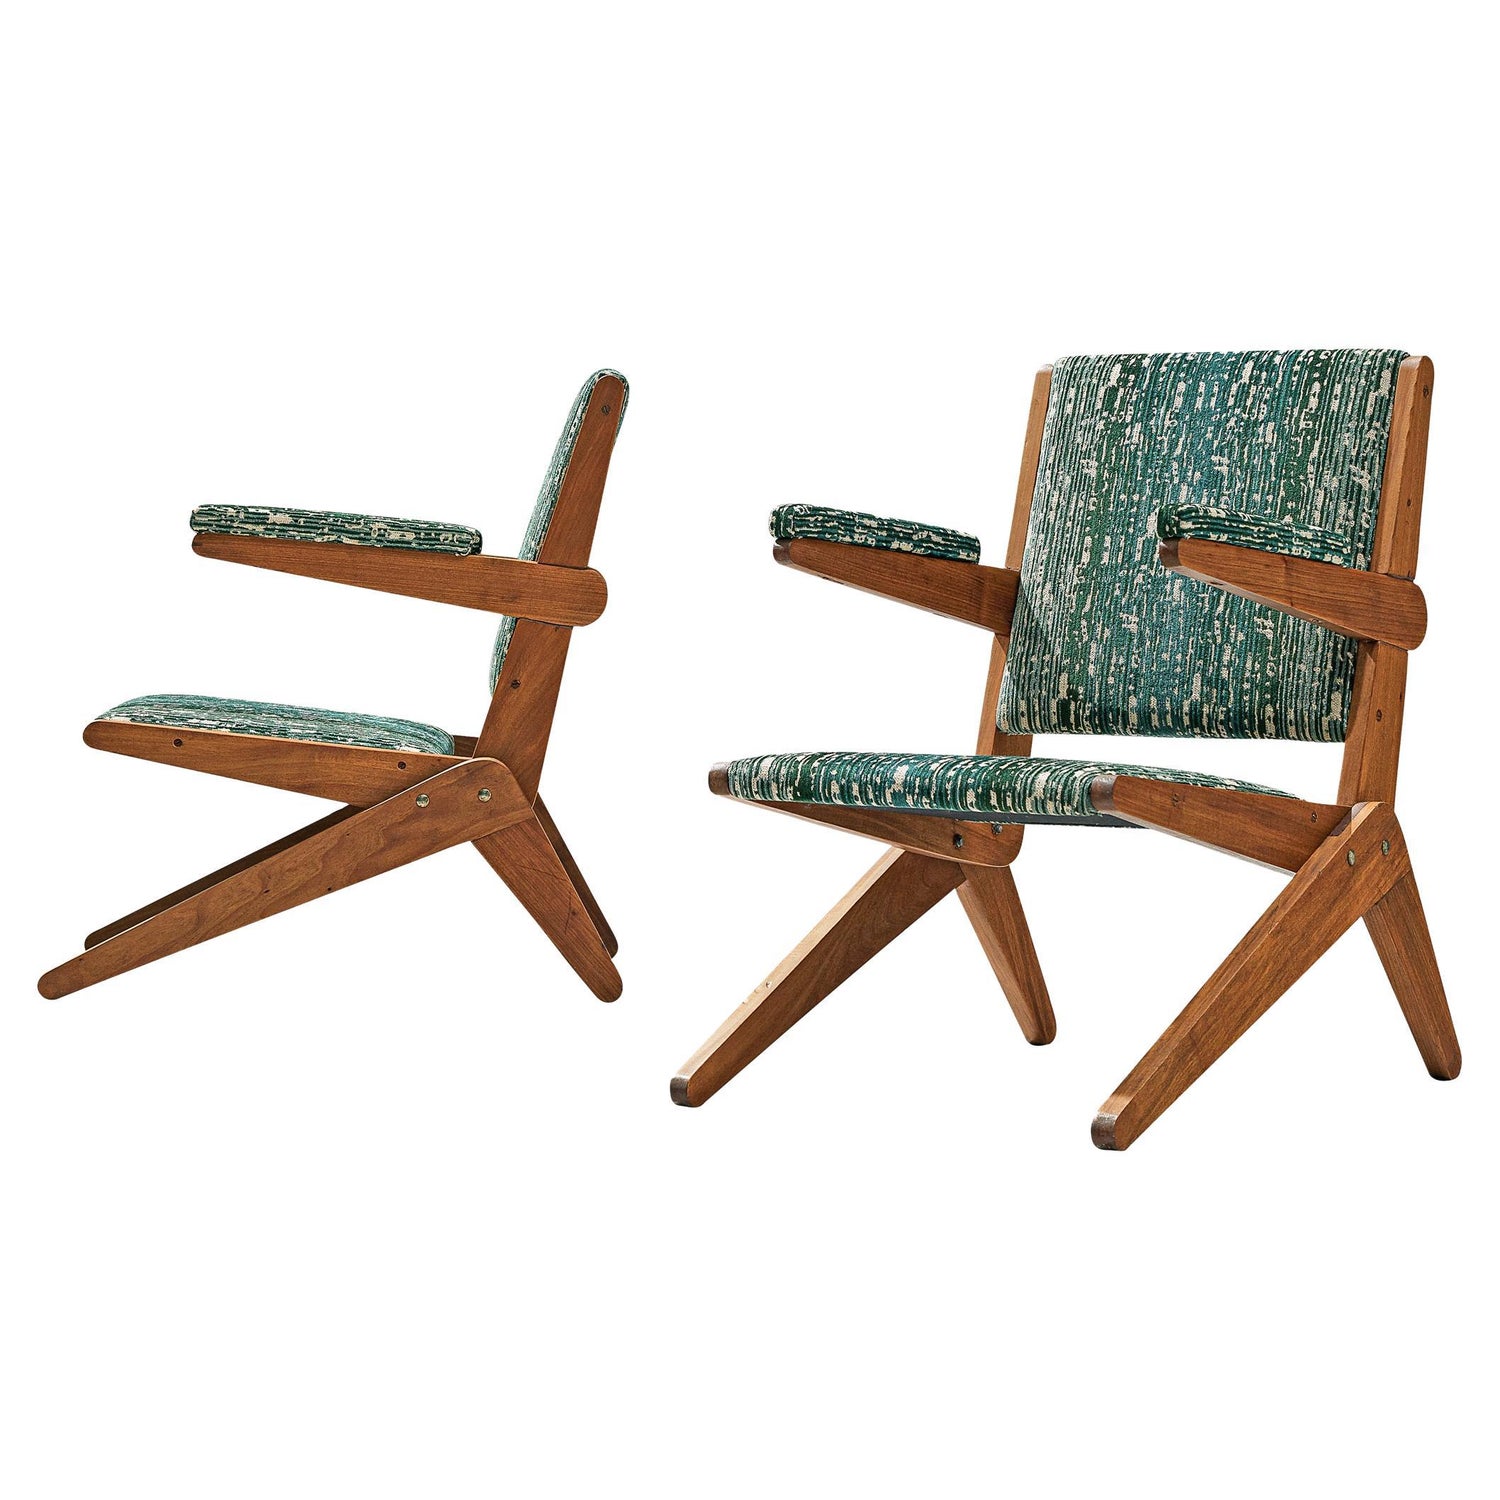 Savana Armchair in Natural Wicker, Brazilian Contemporary Style For Sale at  1stDibs